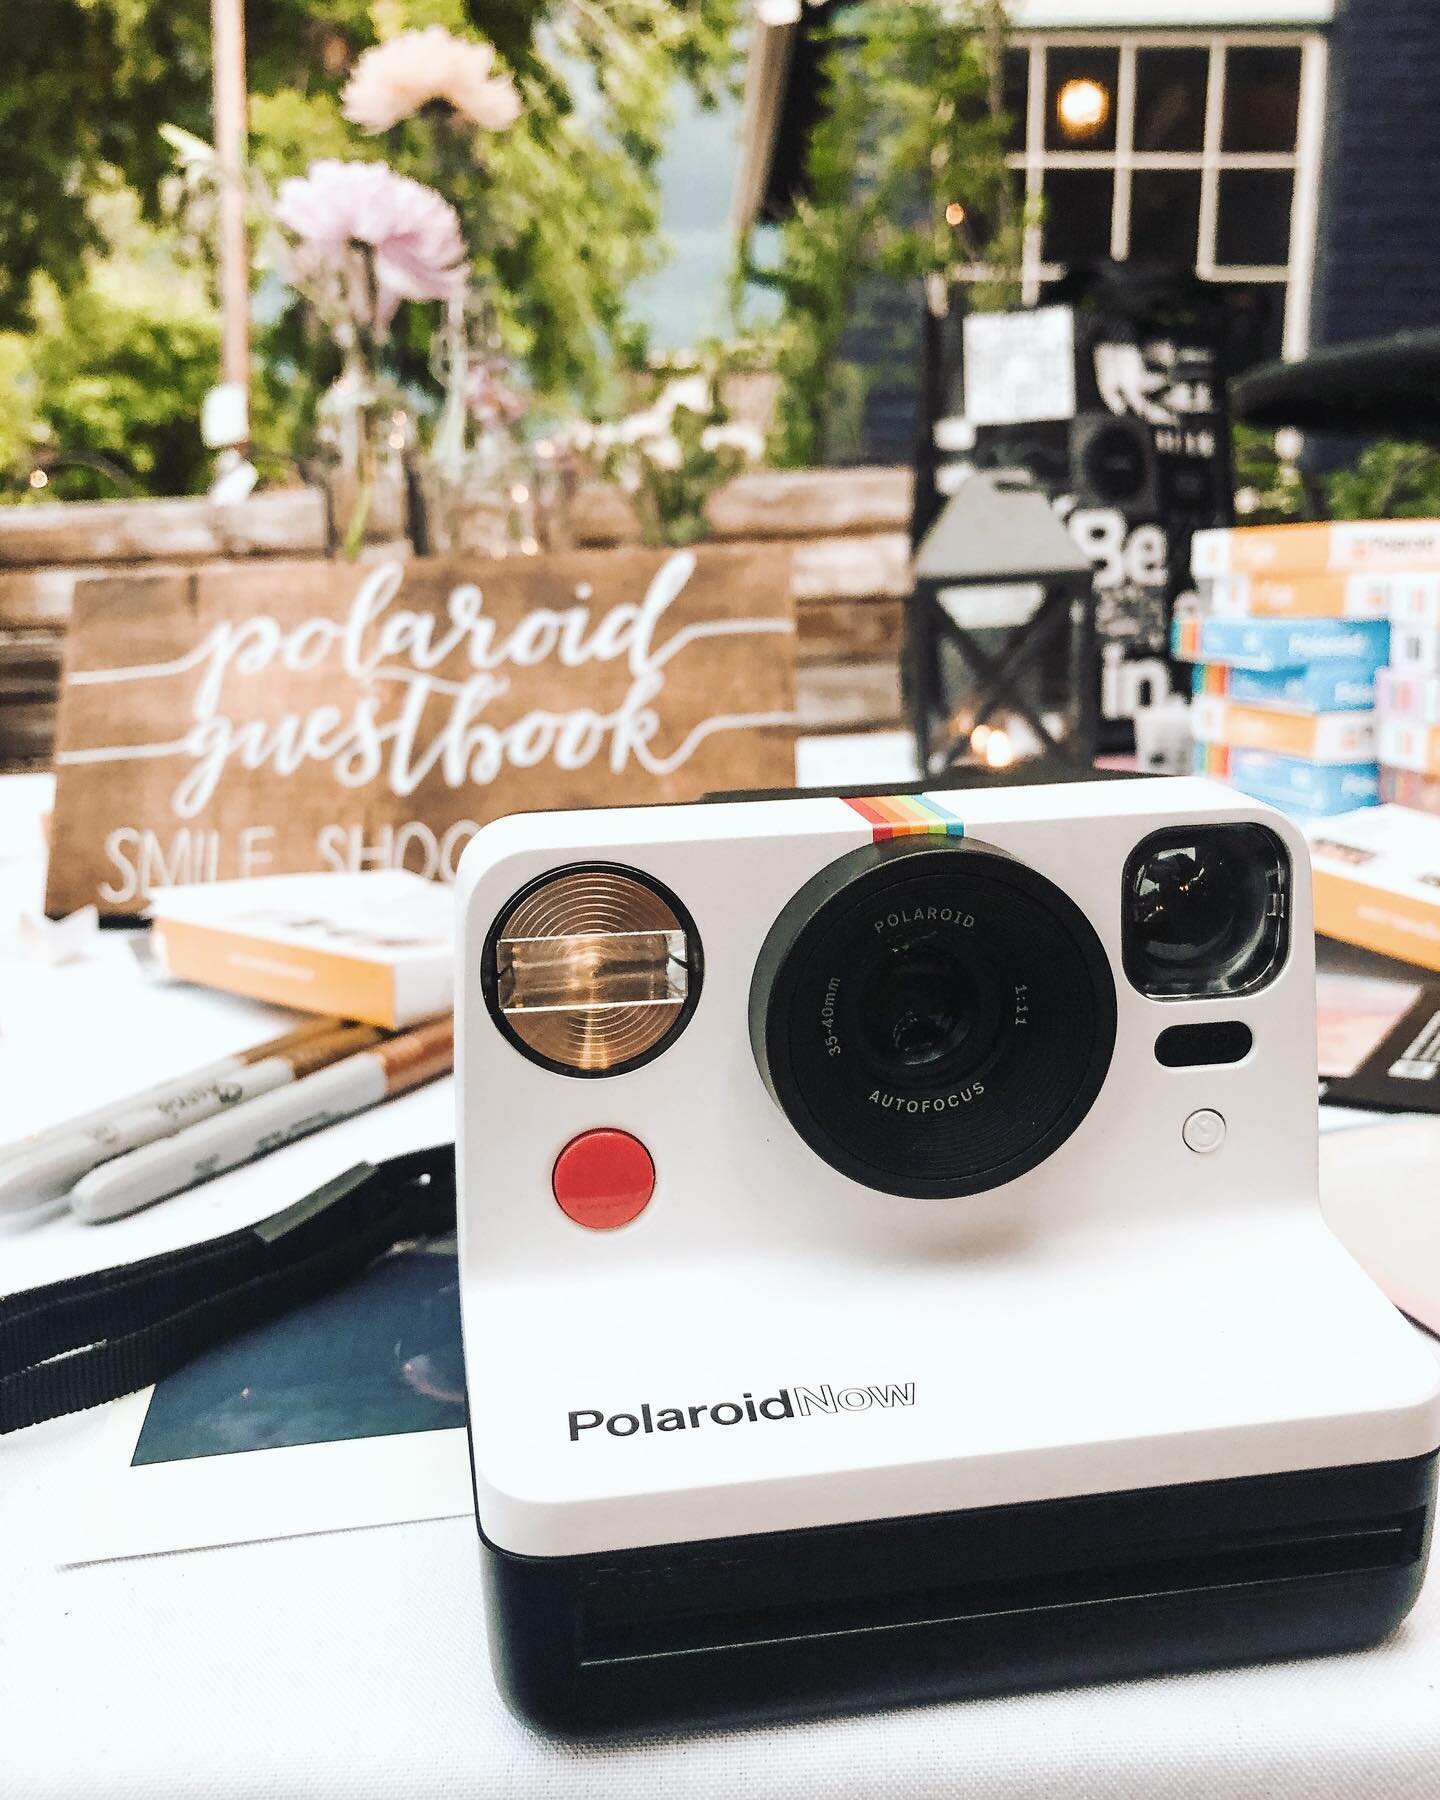 This retro Polaroid guest book was 🔥this weekend. 

This is such a great way to have your guests interact during cocktail hour. It keeps them engaged and is also a fun keepsake after the wedding.
.
.
.
#imtimatewedding 
#denverweddingplanners
#weddi